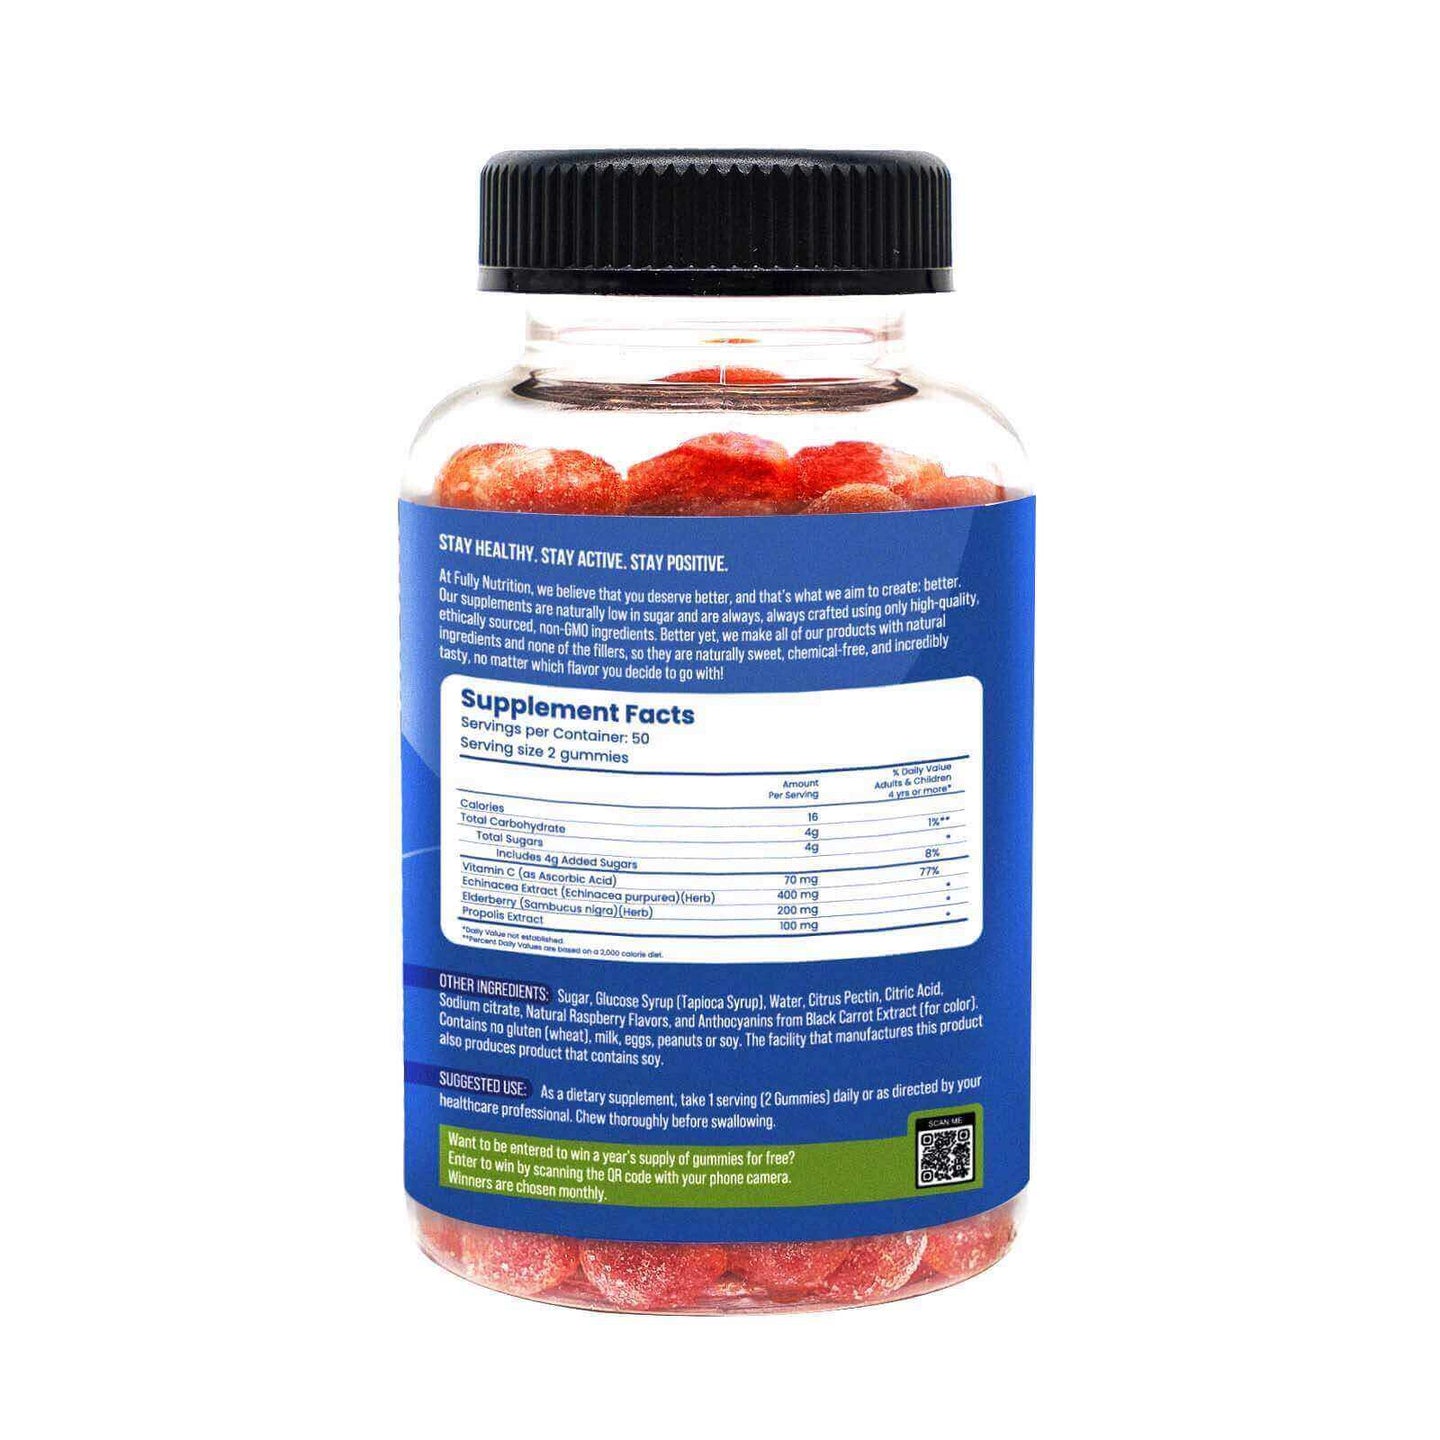 Back side image of fullynutrition.com's elderberry gummies showing the nutritional information and ingredients used in the product